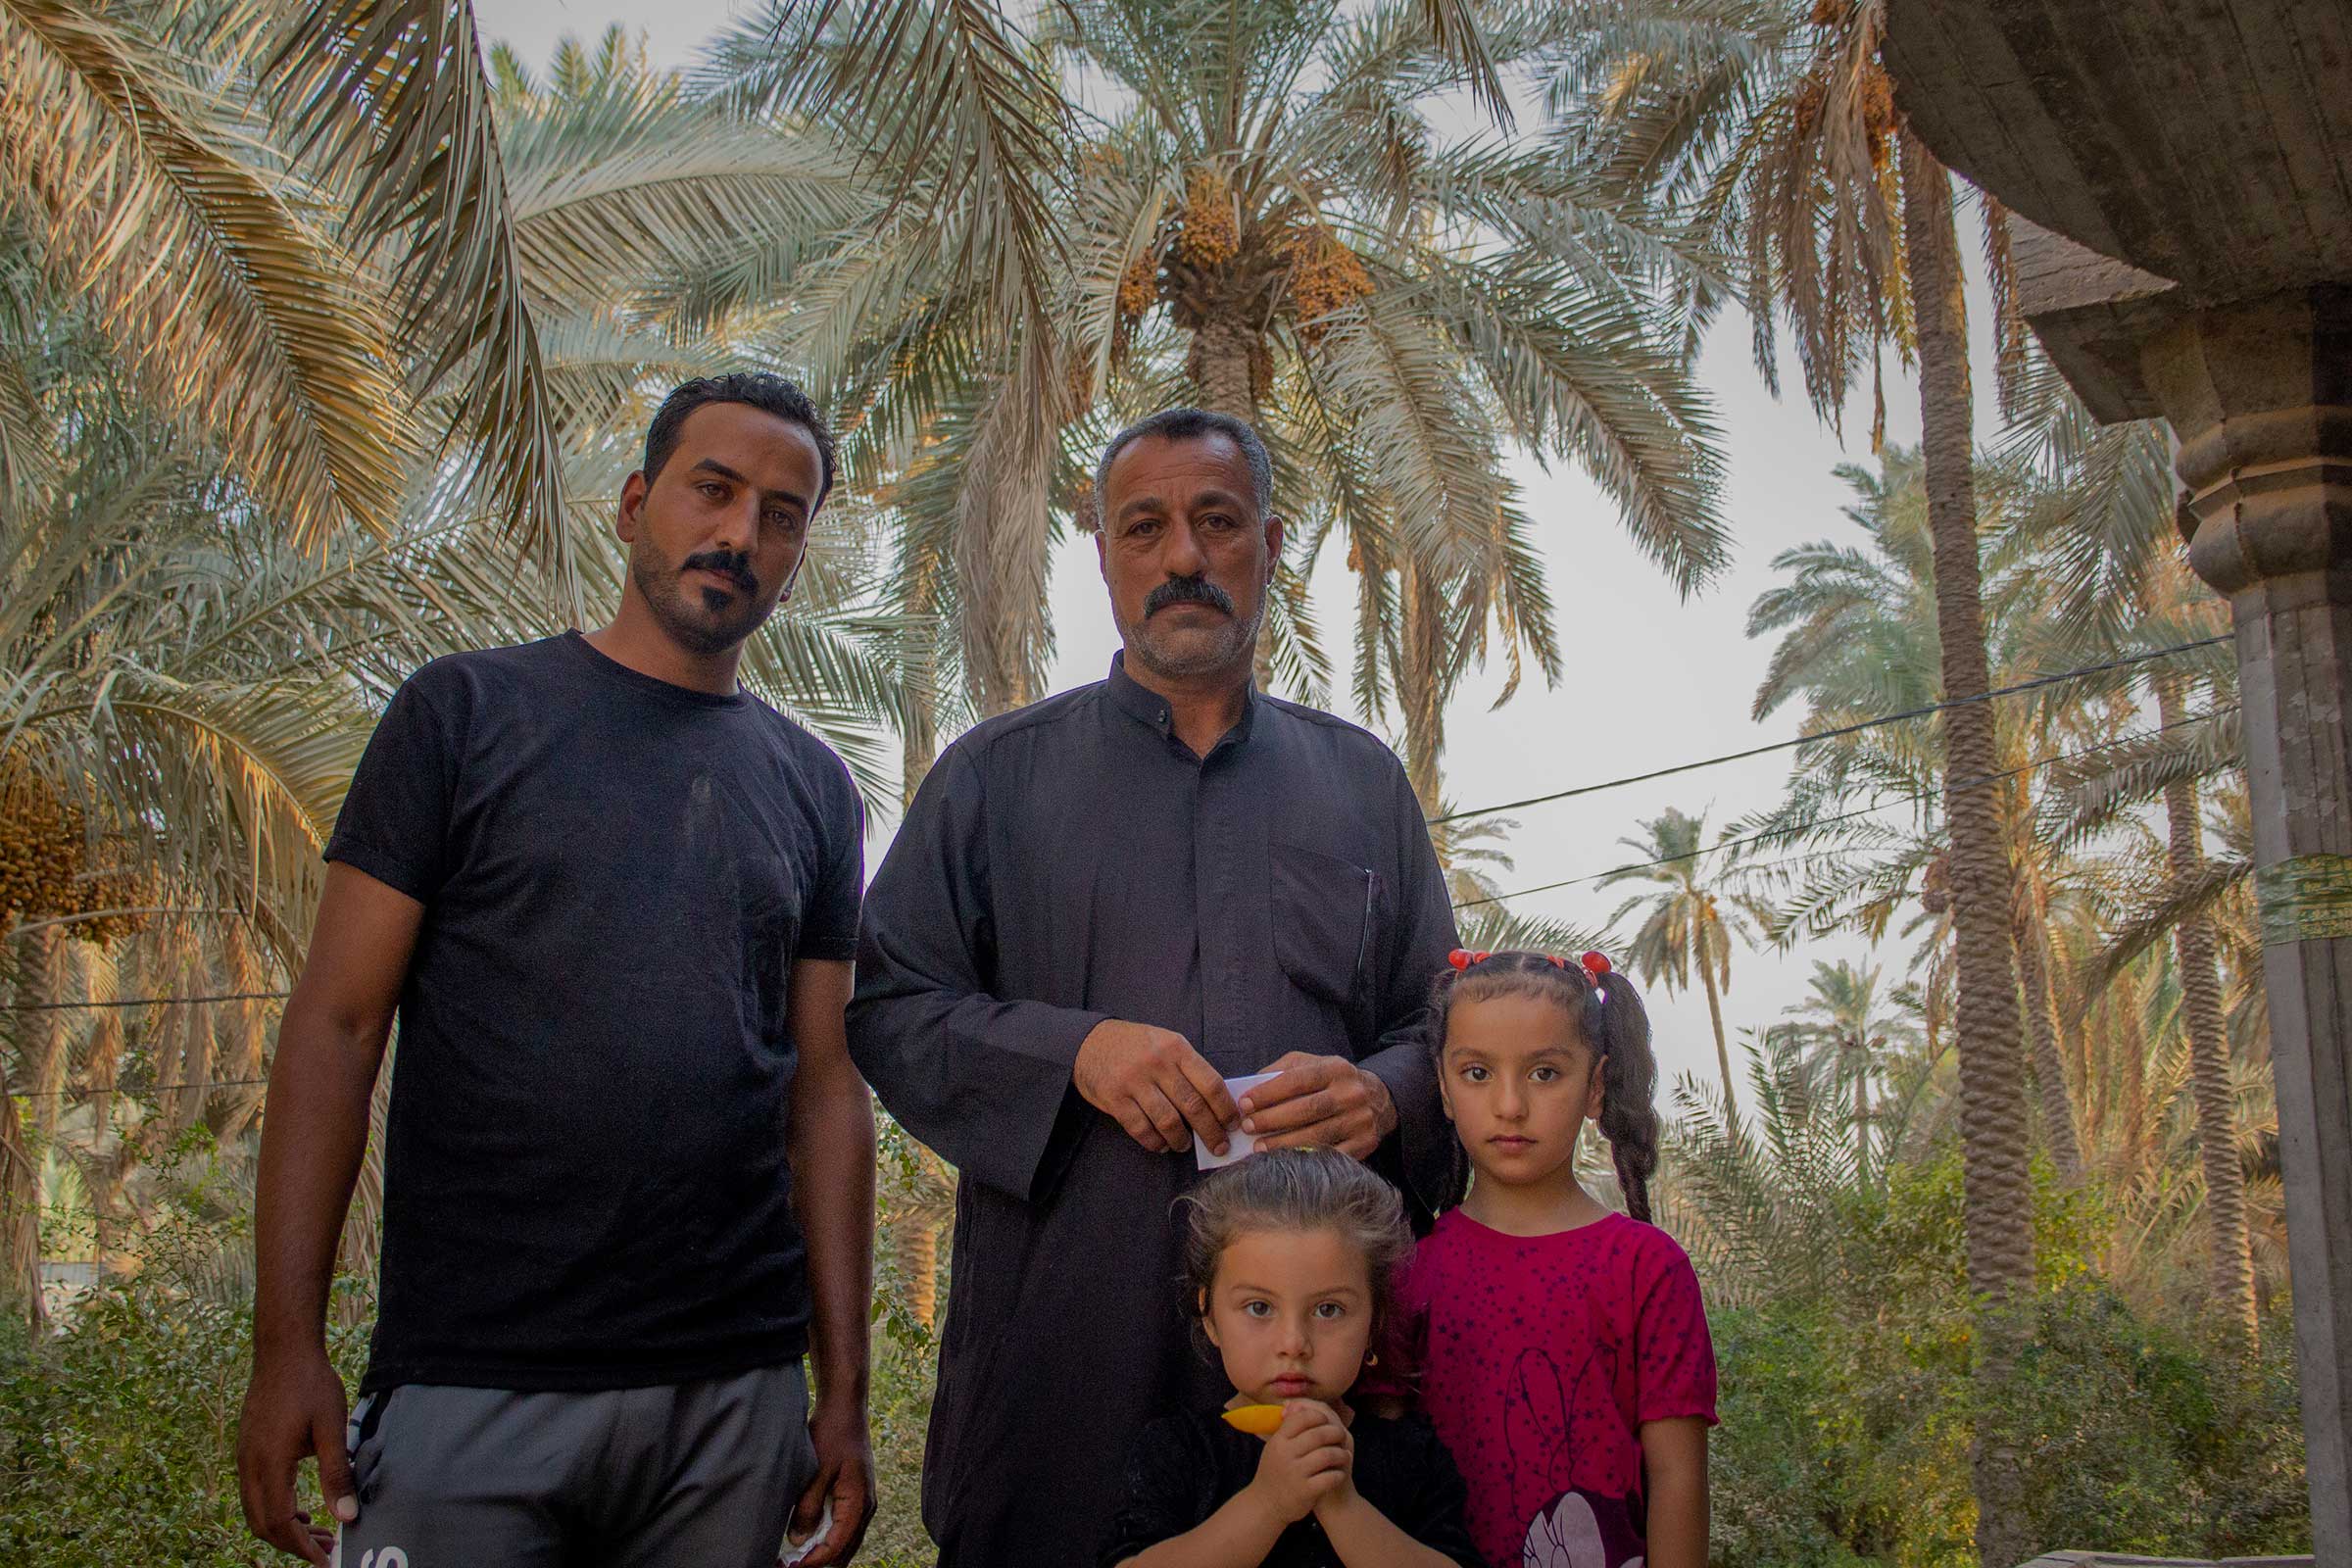 Zemen Al Shammari, left, with his father and daughters. Al Shammari works at the Fedek garden, then returns to his home in a <em>bustaan</em>, a farm with date palms, pomegranates, eggplants, beans, livestock, that serve as a desertification buffer. (Sam Kimball)